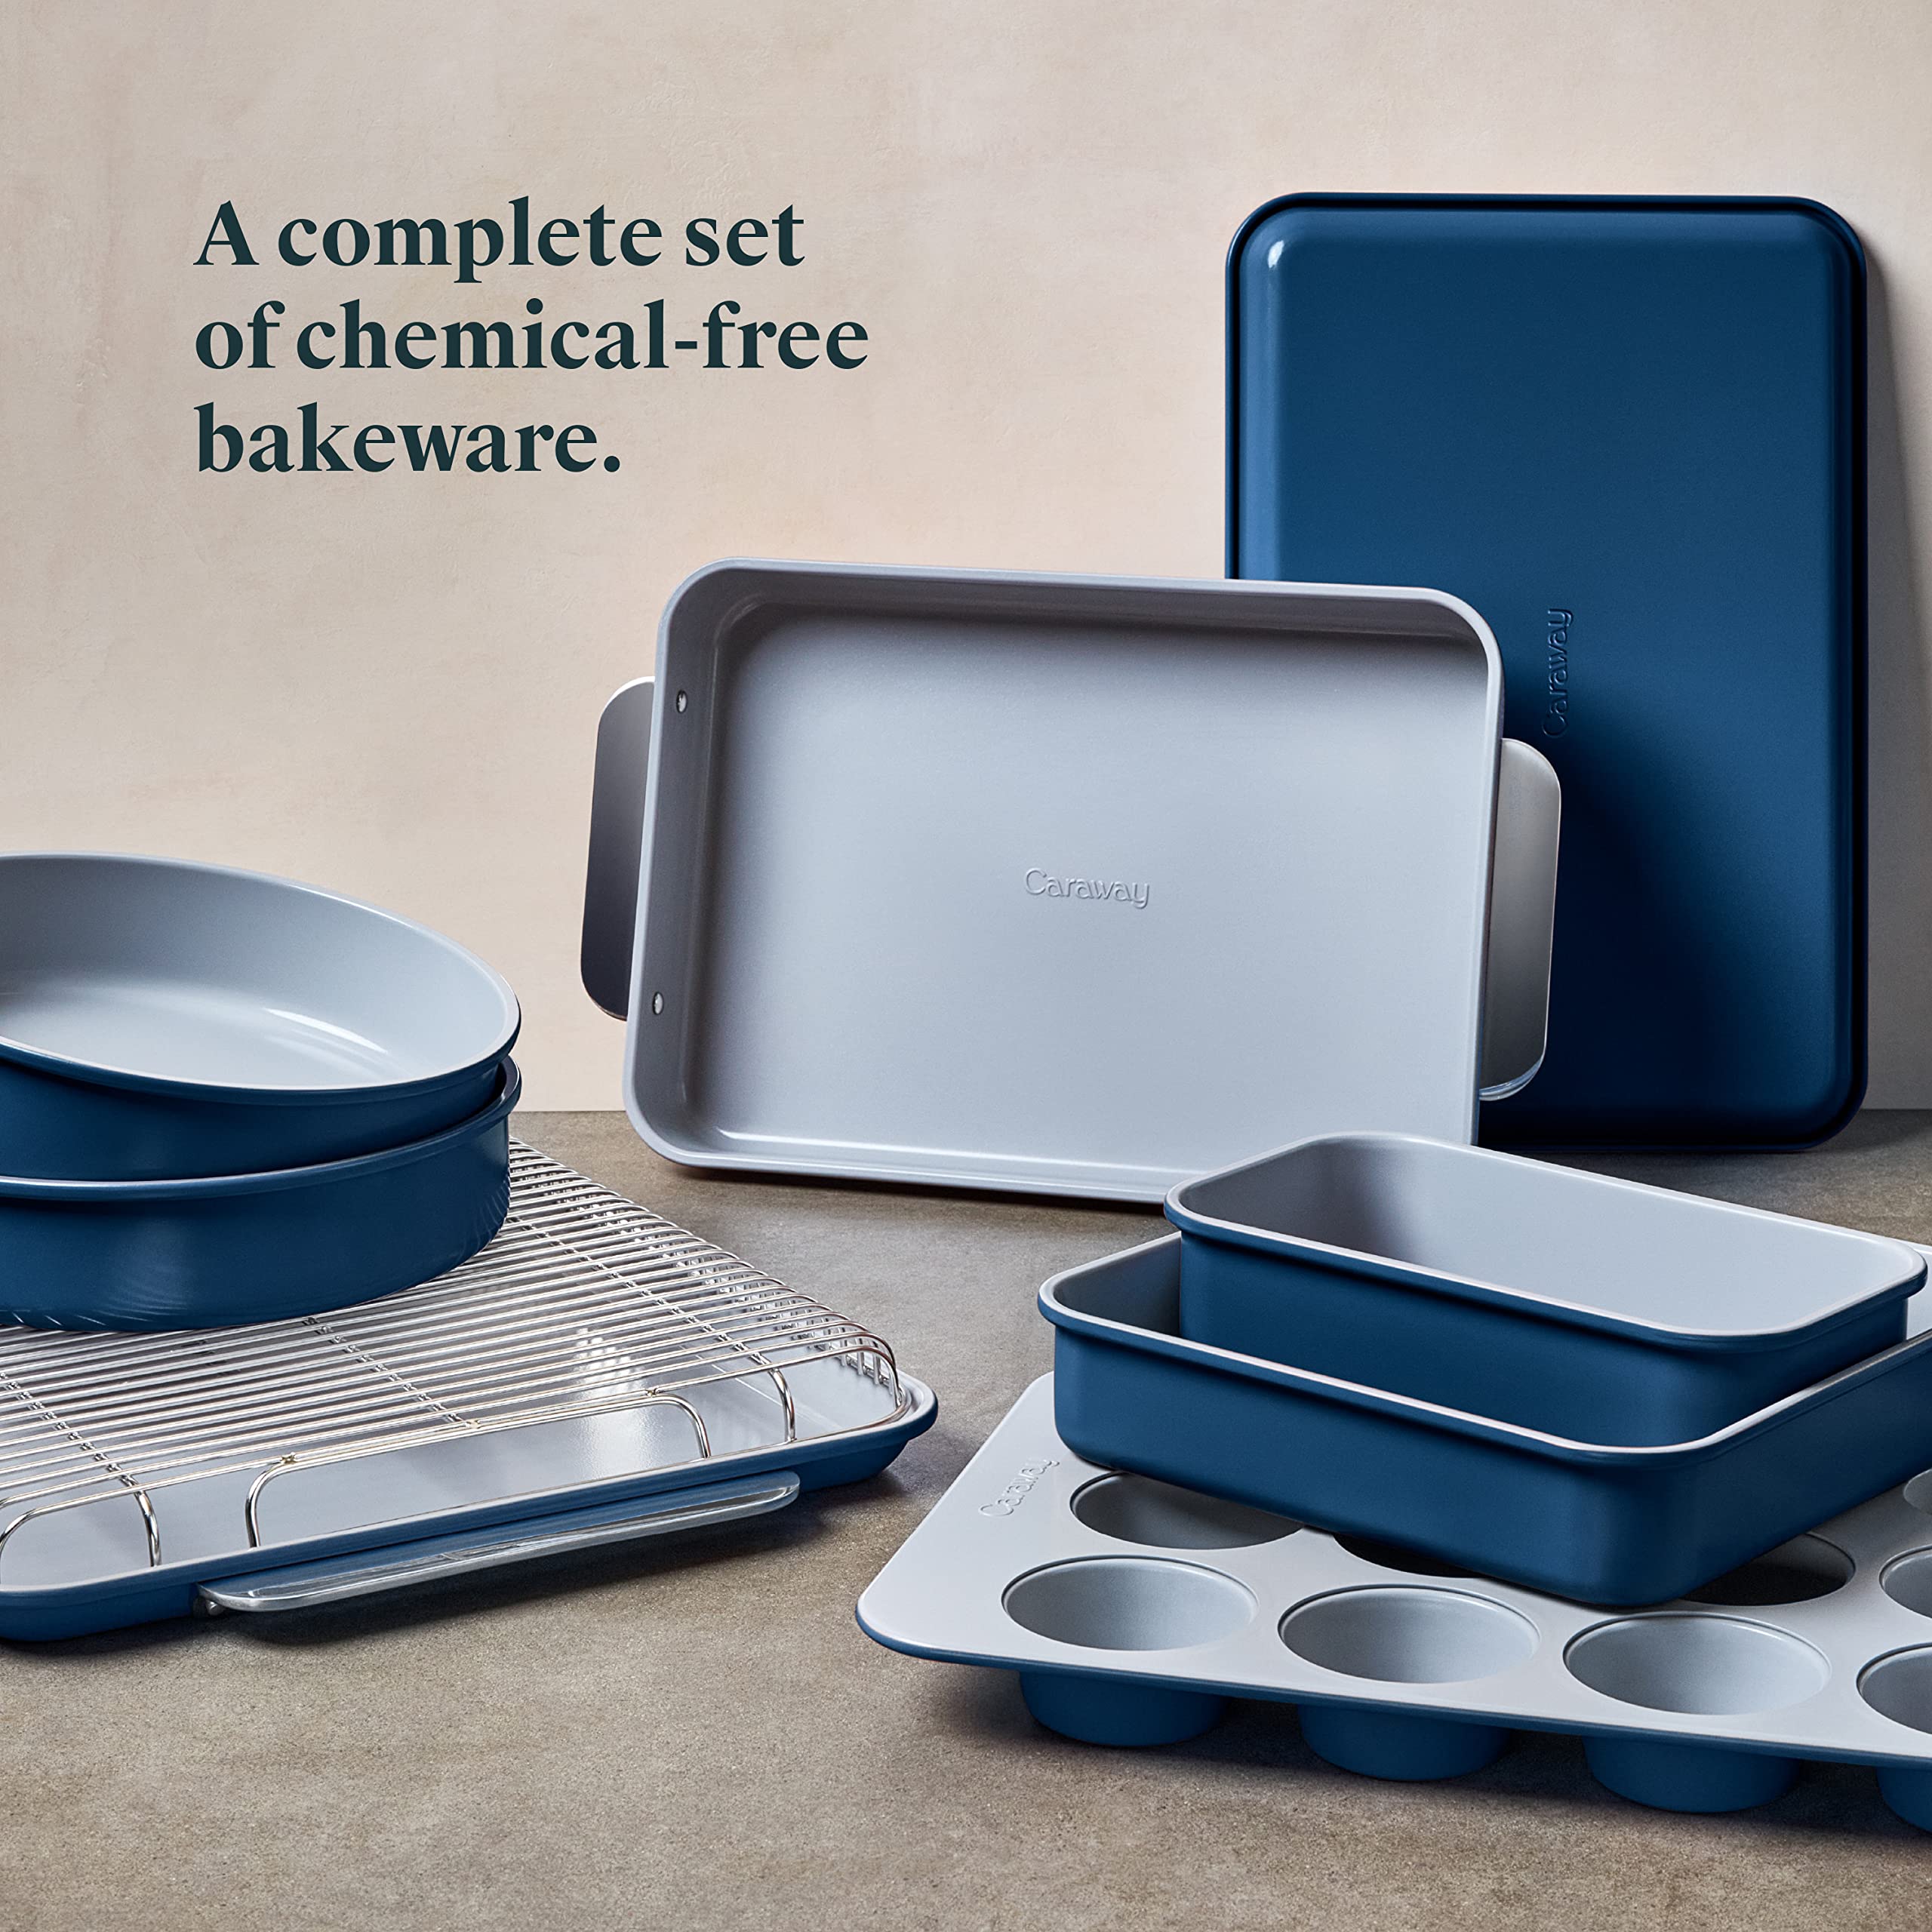 Caraway Nonstick Ceramic Bakeware Set (11 Pieces) - Baking Sheets, Assorted Baking Pans, Cooling Rack, & Storage - Aluminized Steel Body - Non Toxic, PTFE & PFOA Free - Navy